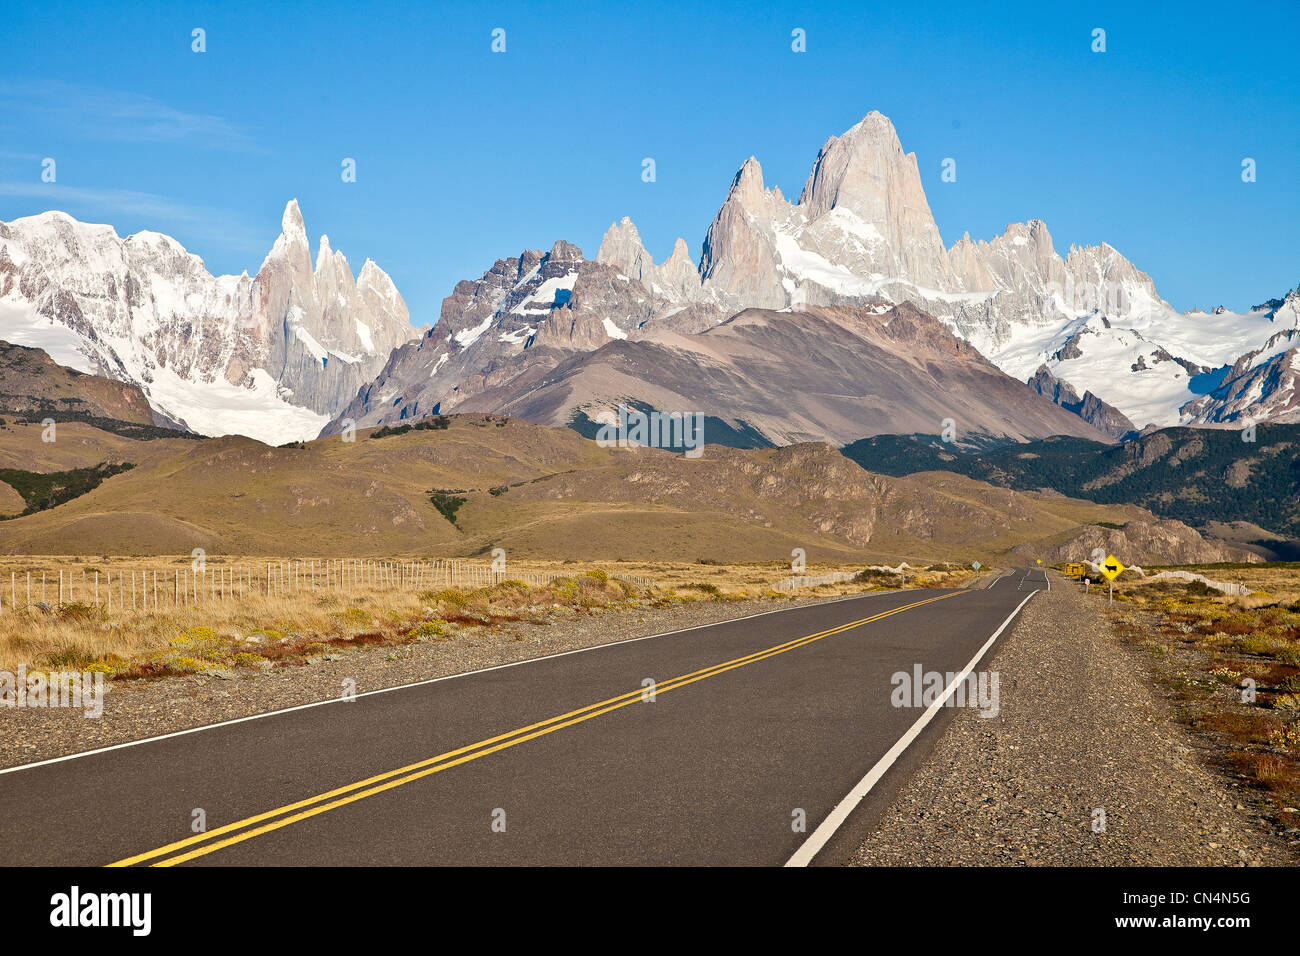 Argentina, Patagonia, Santa Cruz province, Los Glaciares National Park, listed as World Heritage by UNESCO, the road to El Stock Photo